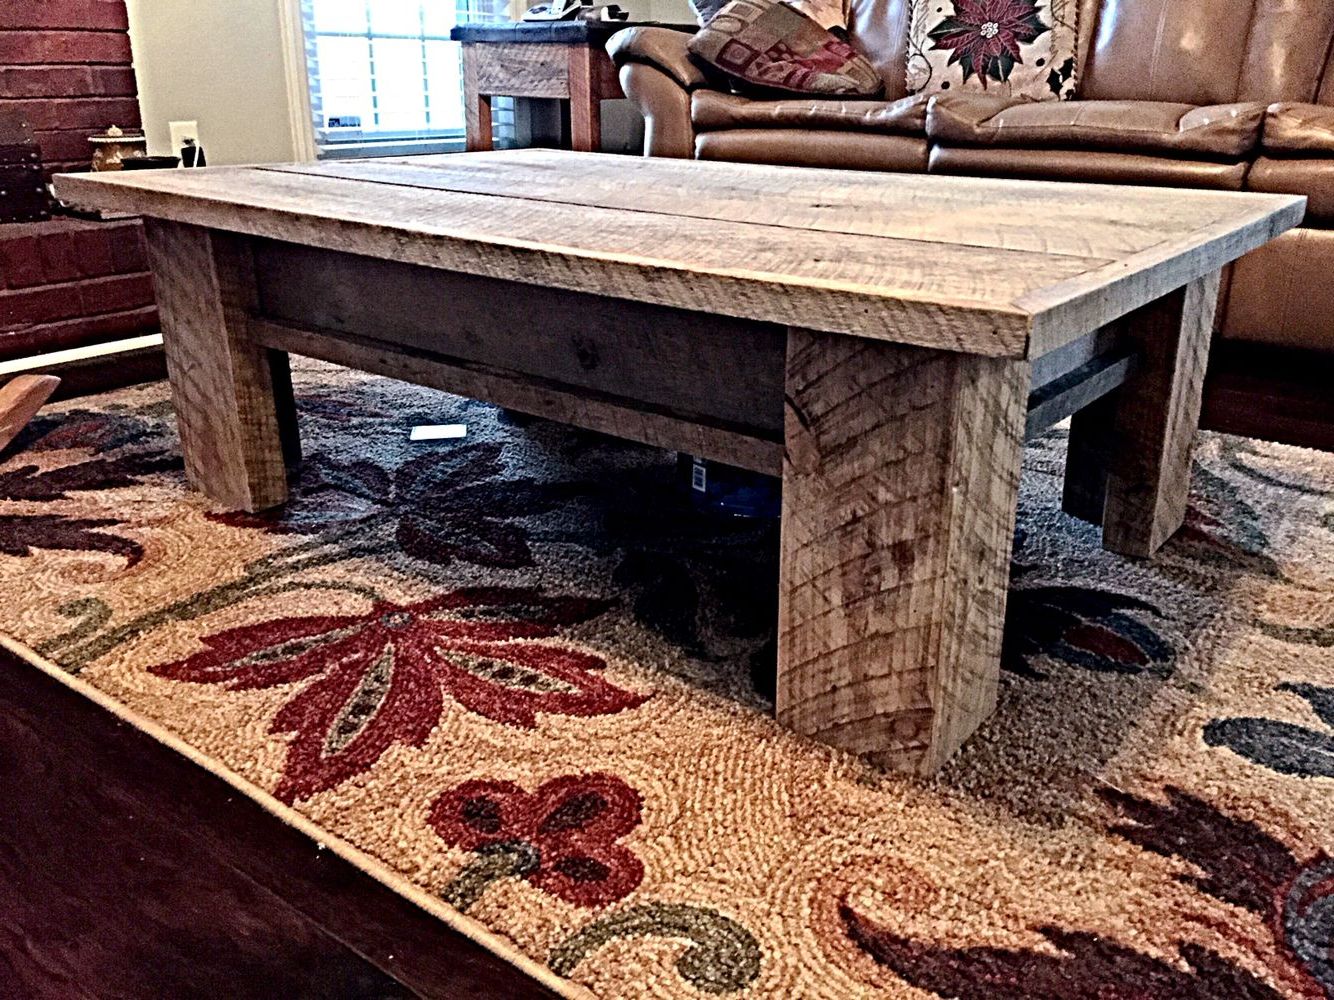 2020 Rustic Wood Coffee Tables Throughout Rustic Reclaimed Barnwood Coffee Tablevintage Southern Creations (View 13 of 15)